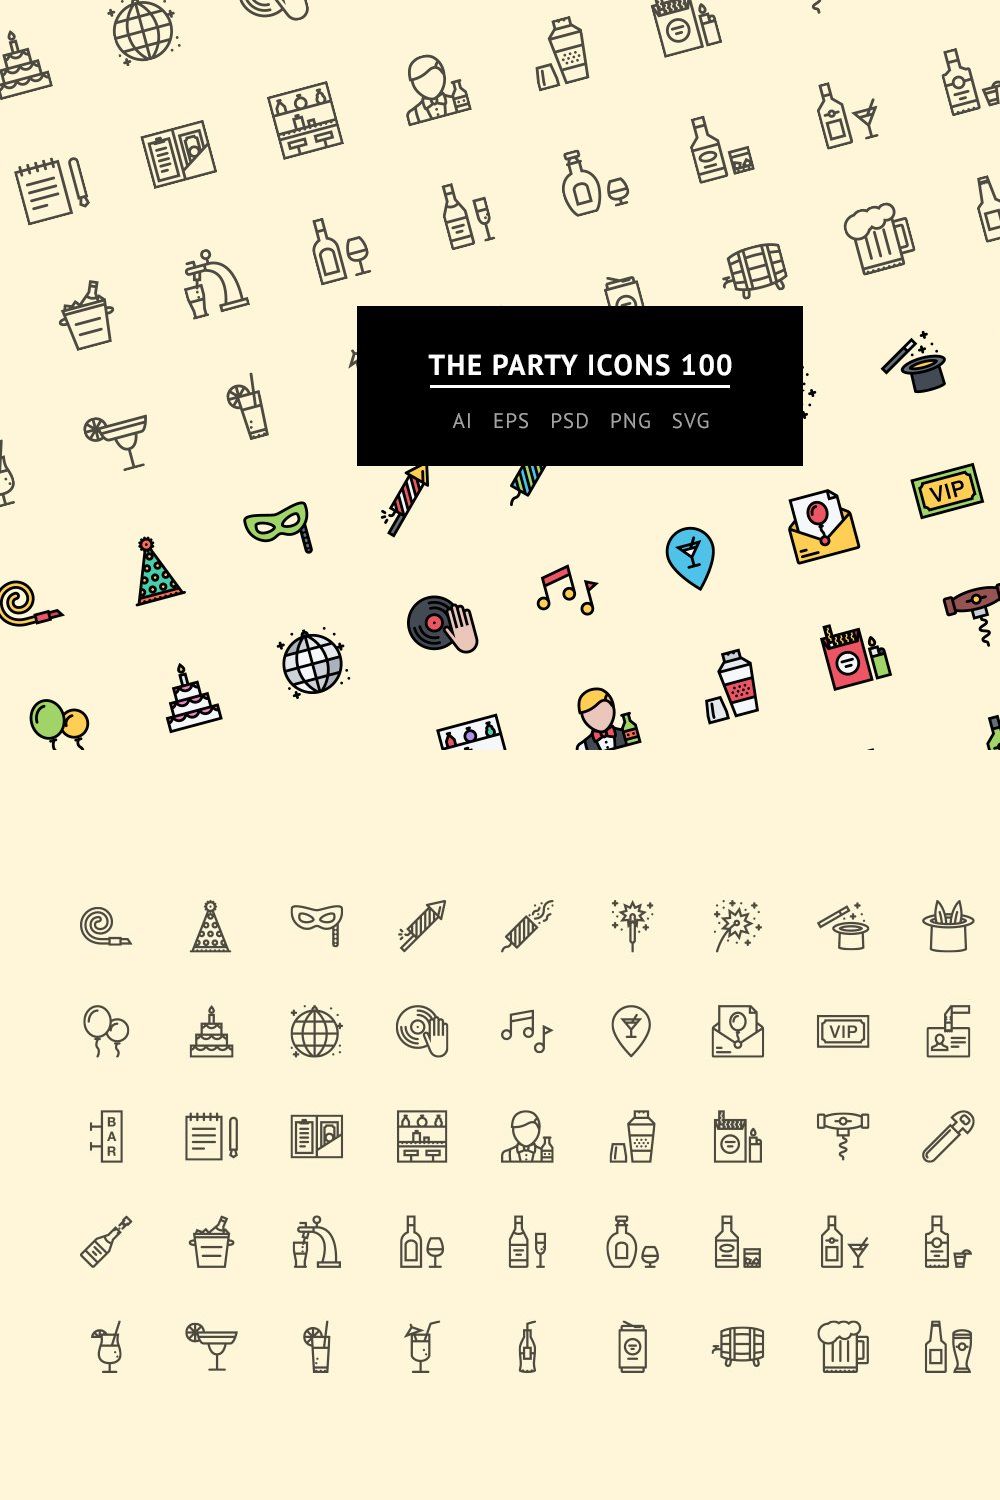 The Party Icons 100 pinterest preview image.